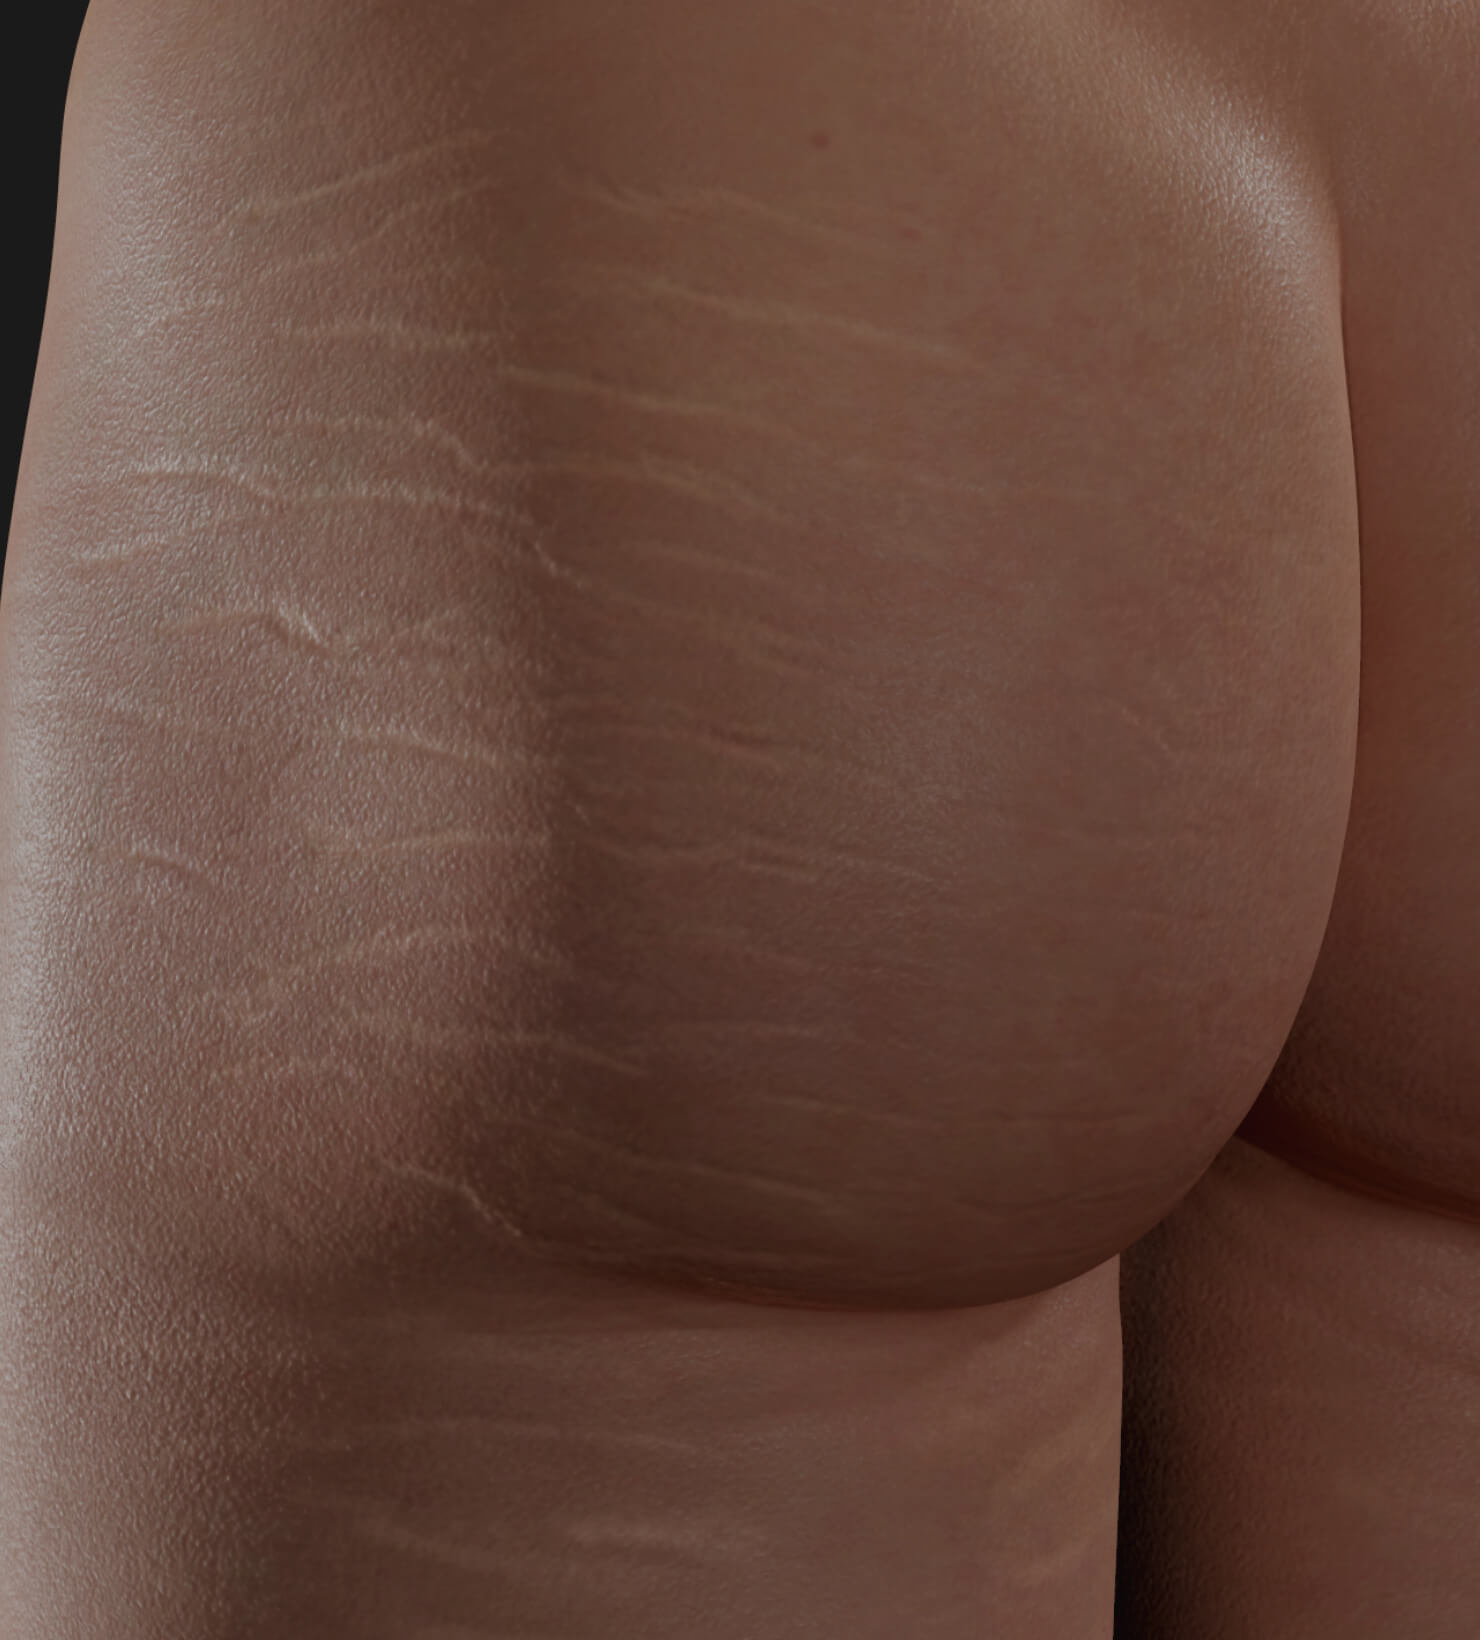 Buttocks of a Clinique Chloé female patient with stretch marks to be treated with platelet-rich plasma, or PRP